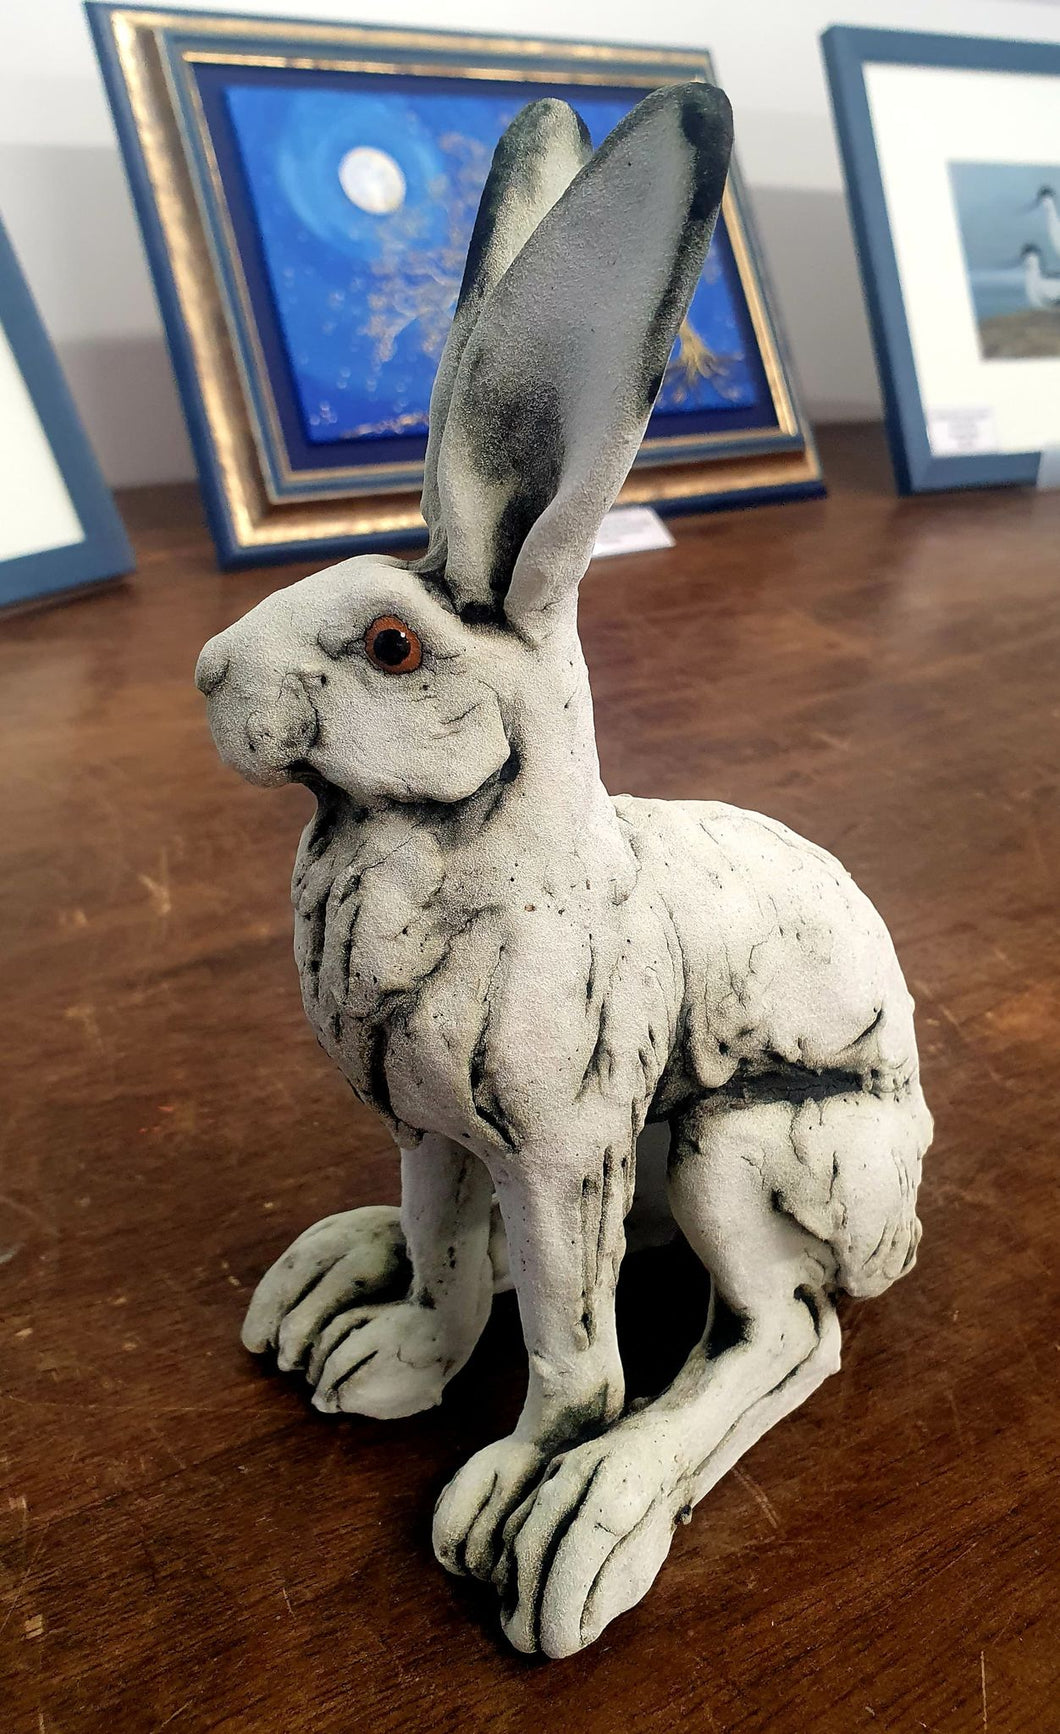 Peter the Hare by Sally Gardiner